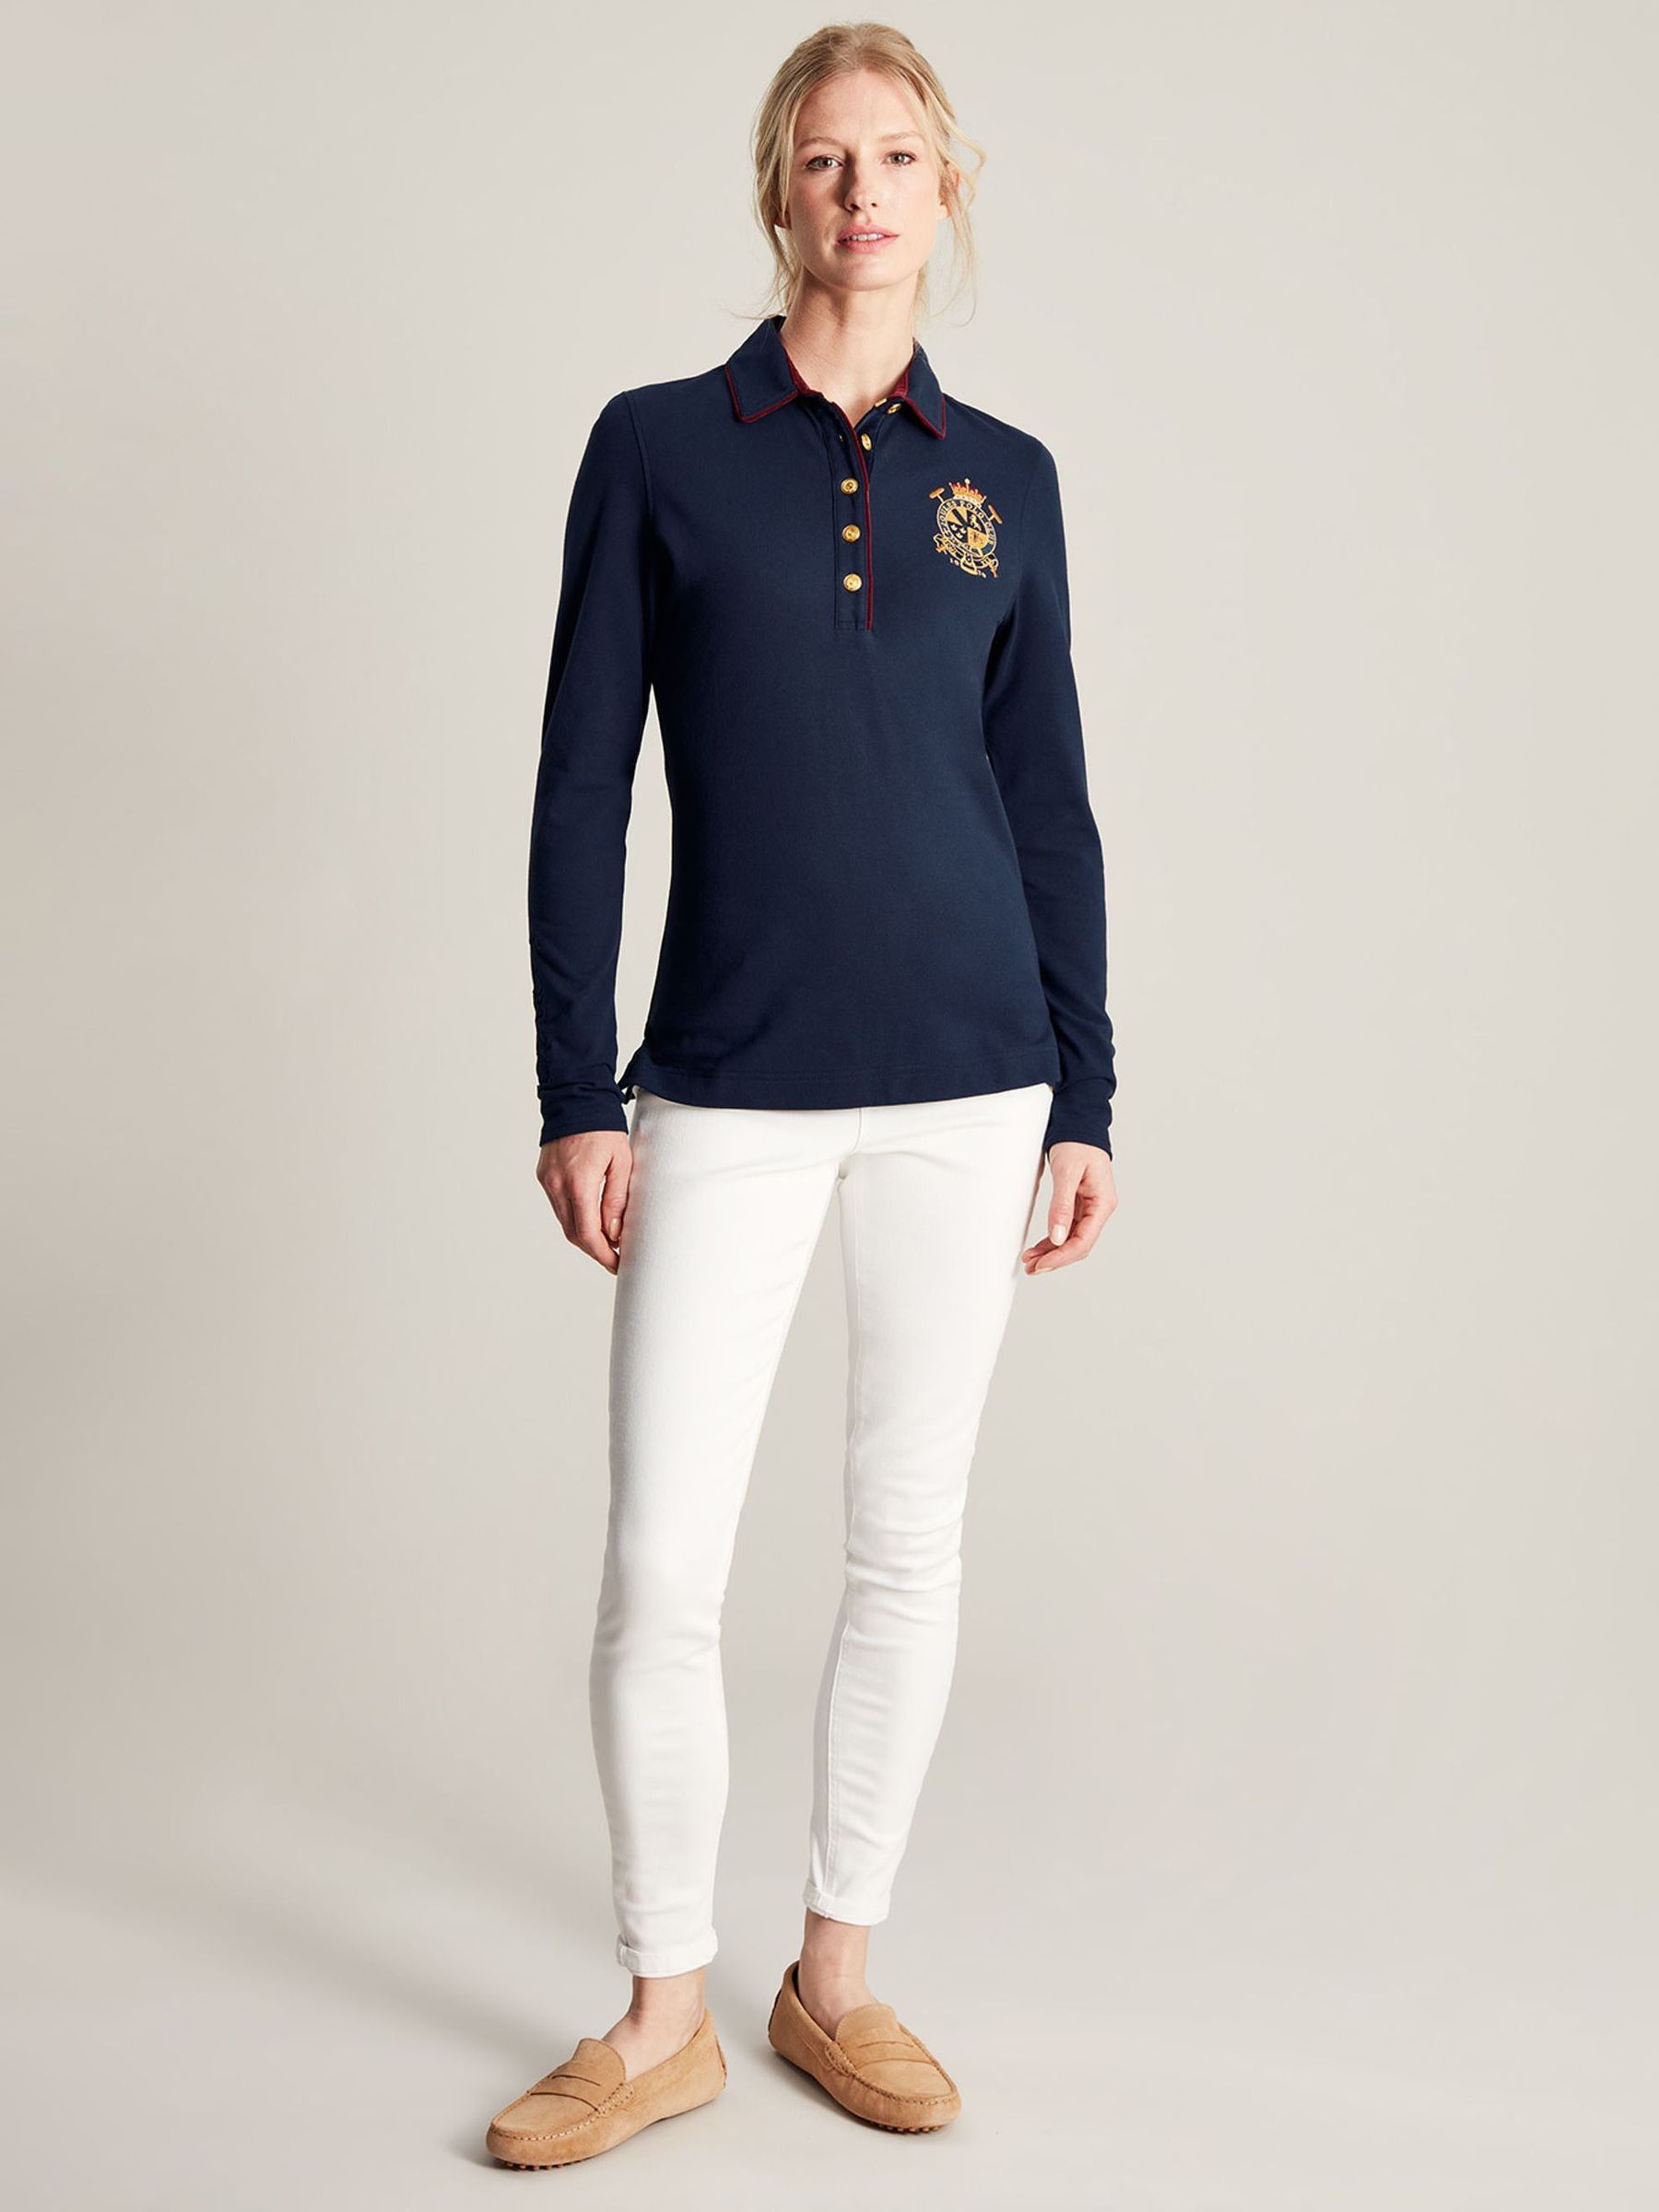 Buy Joules Ashley Long Sleeve Polo Shirt from the Joules online shop